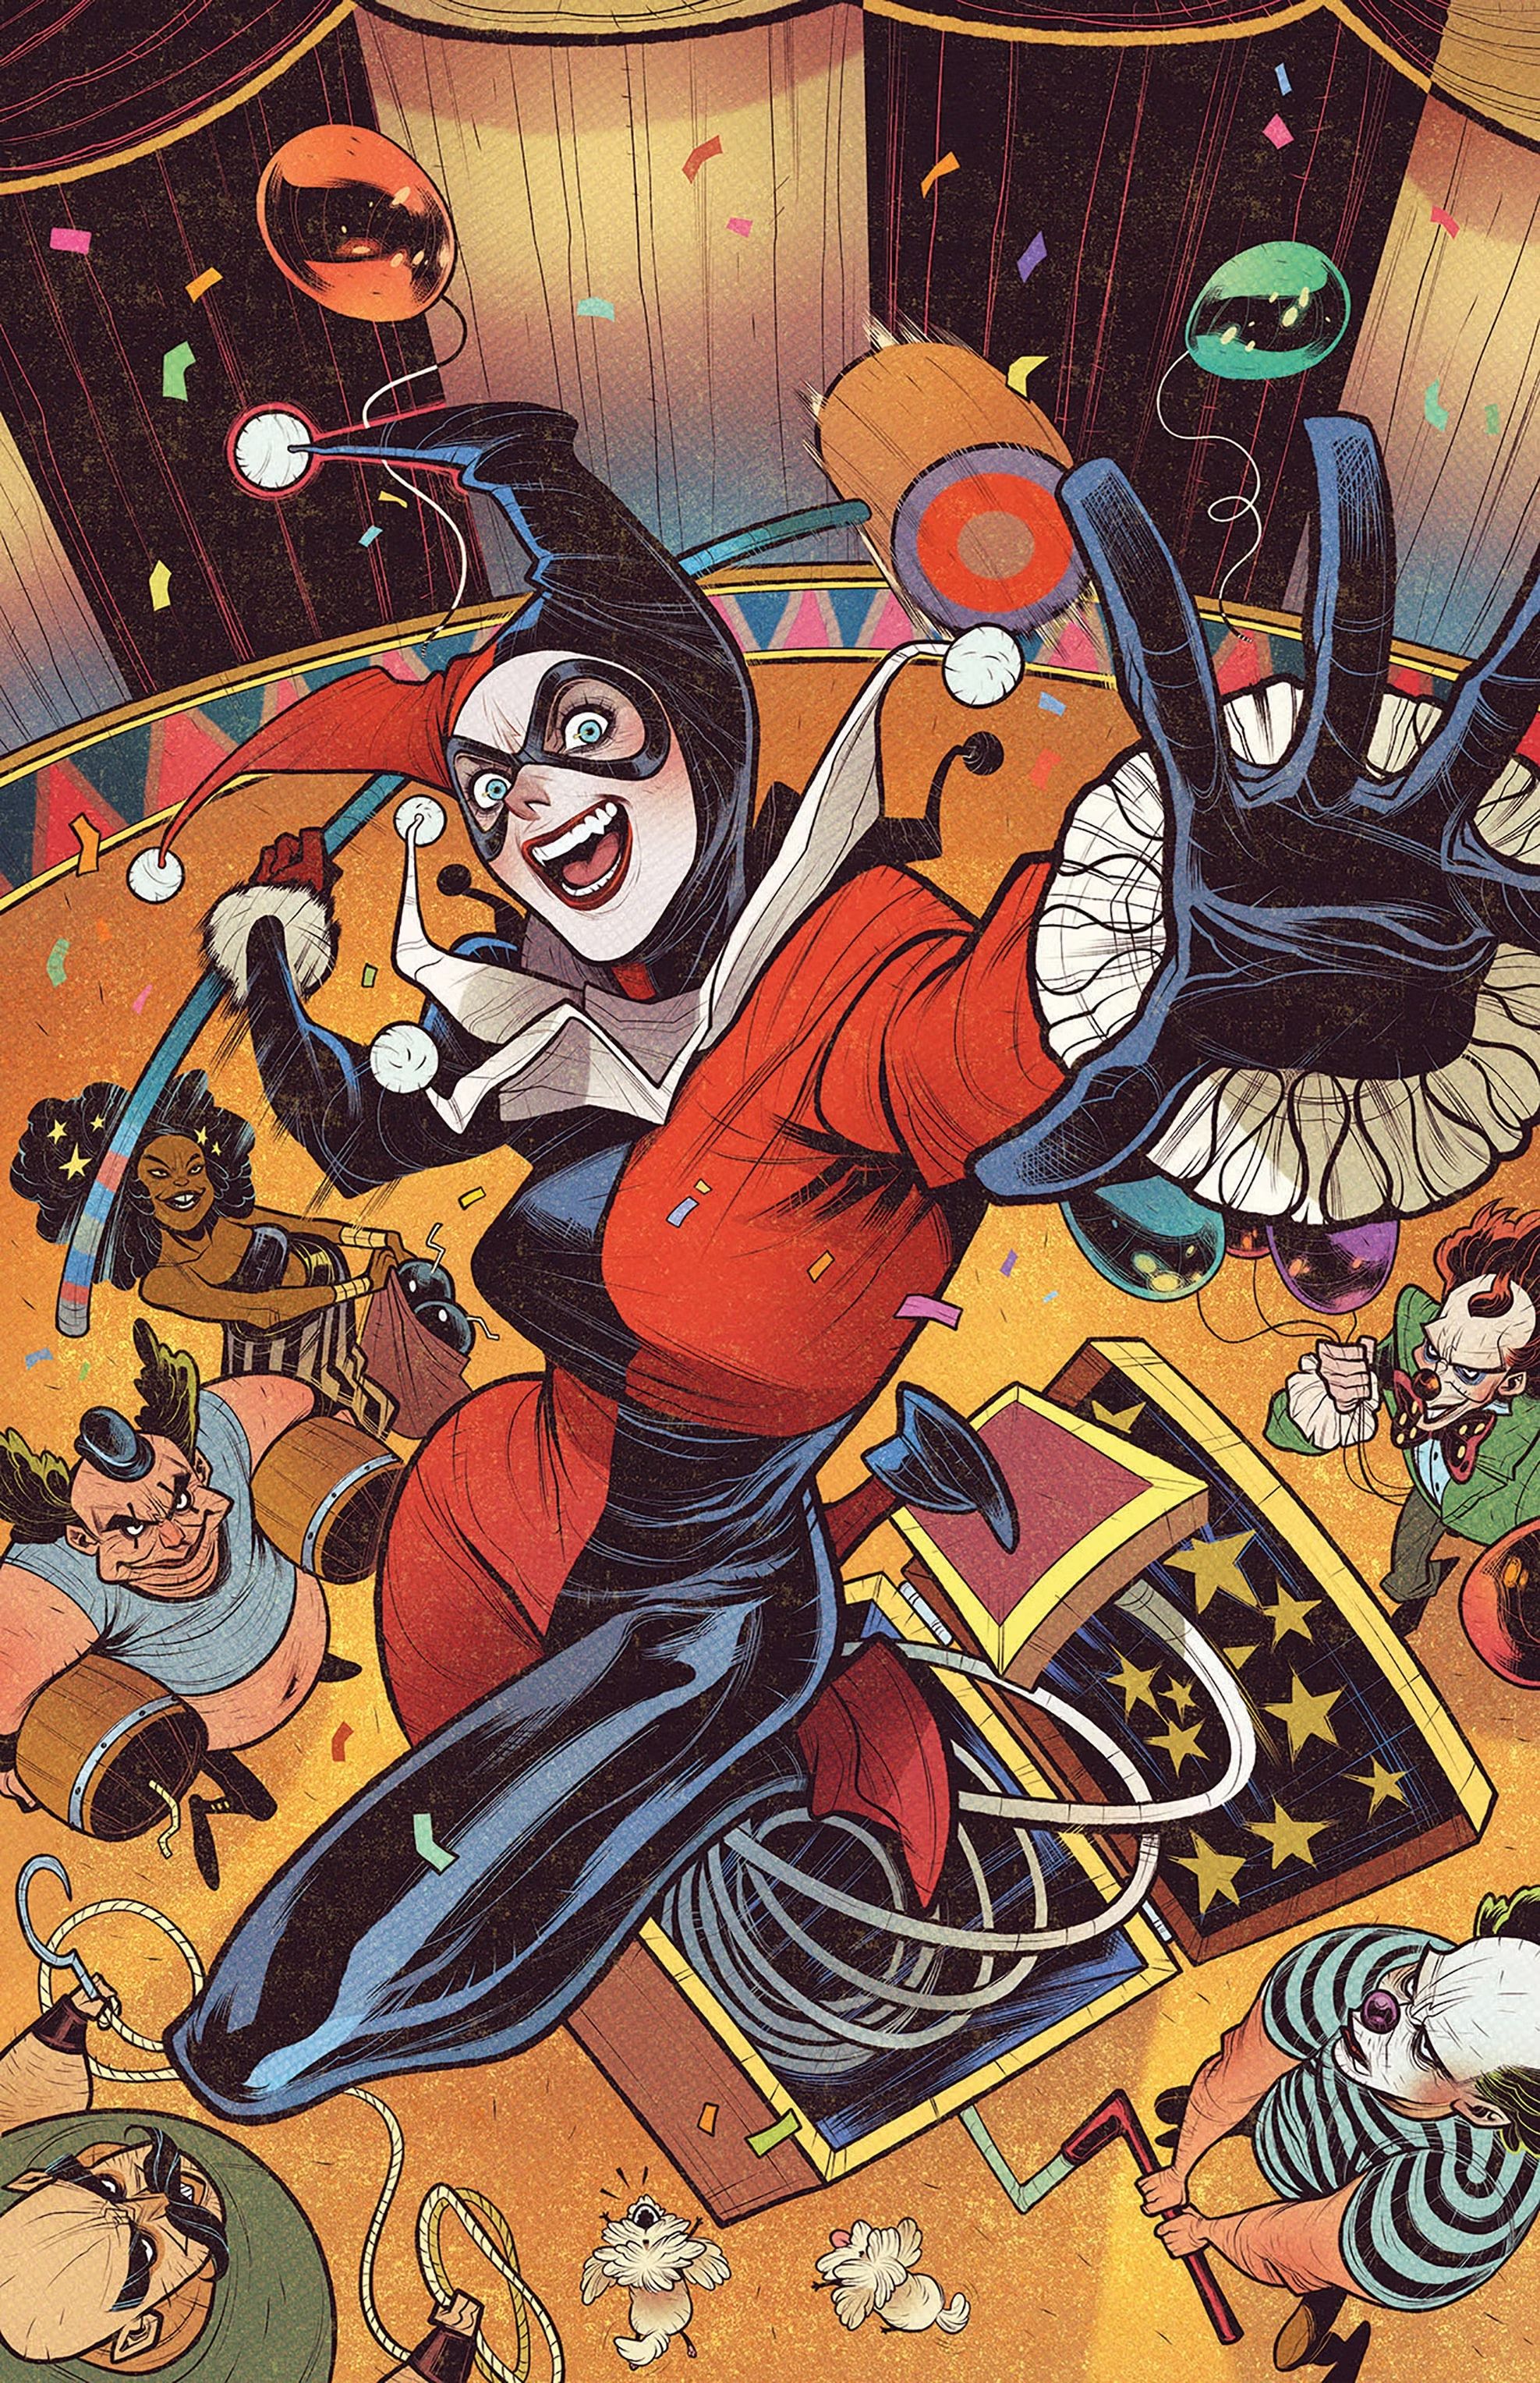 Harley Quinn’s Classic Costume Makes Her the Perfect Jack-in-the-Box in New Art